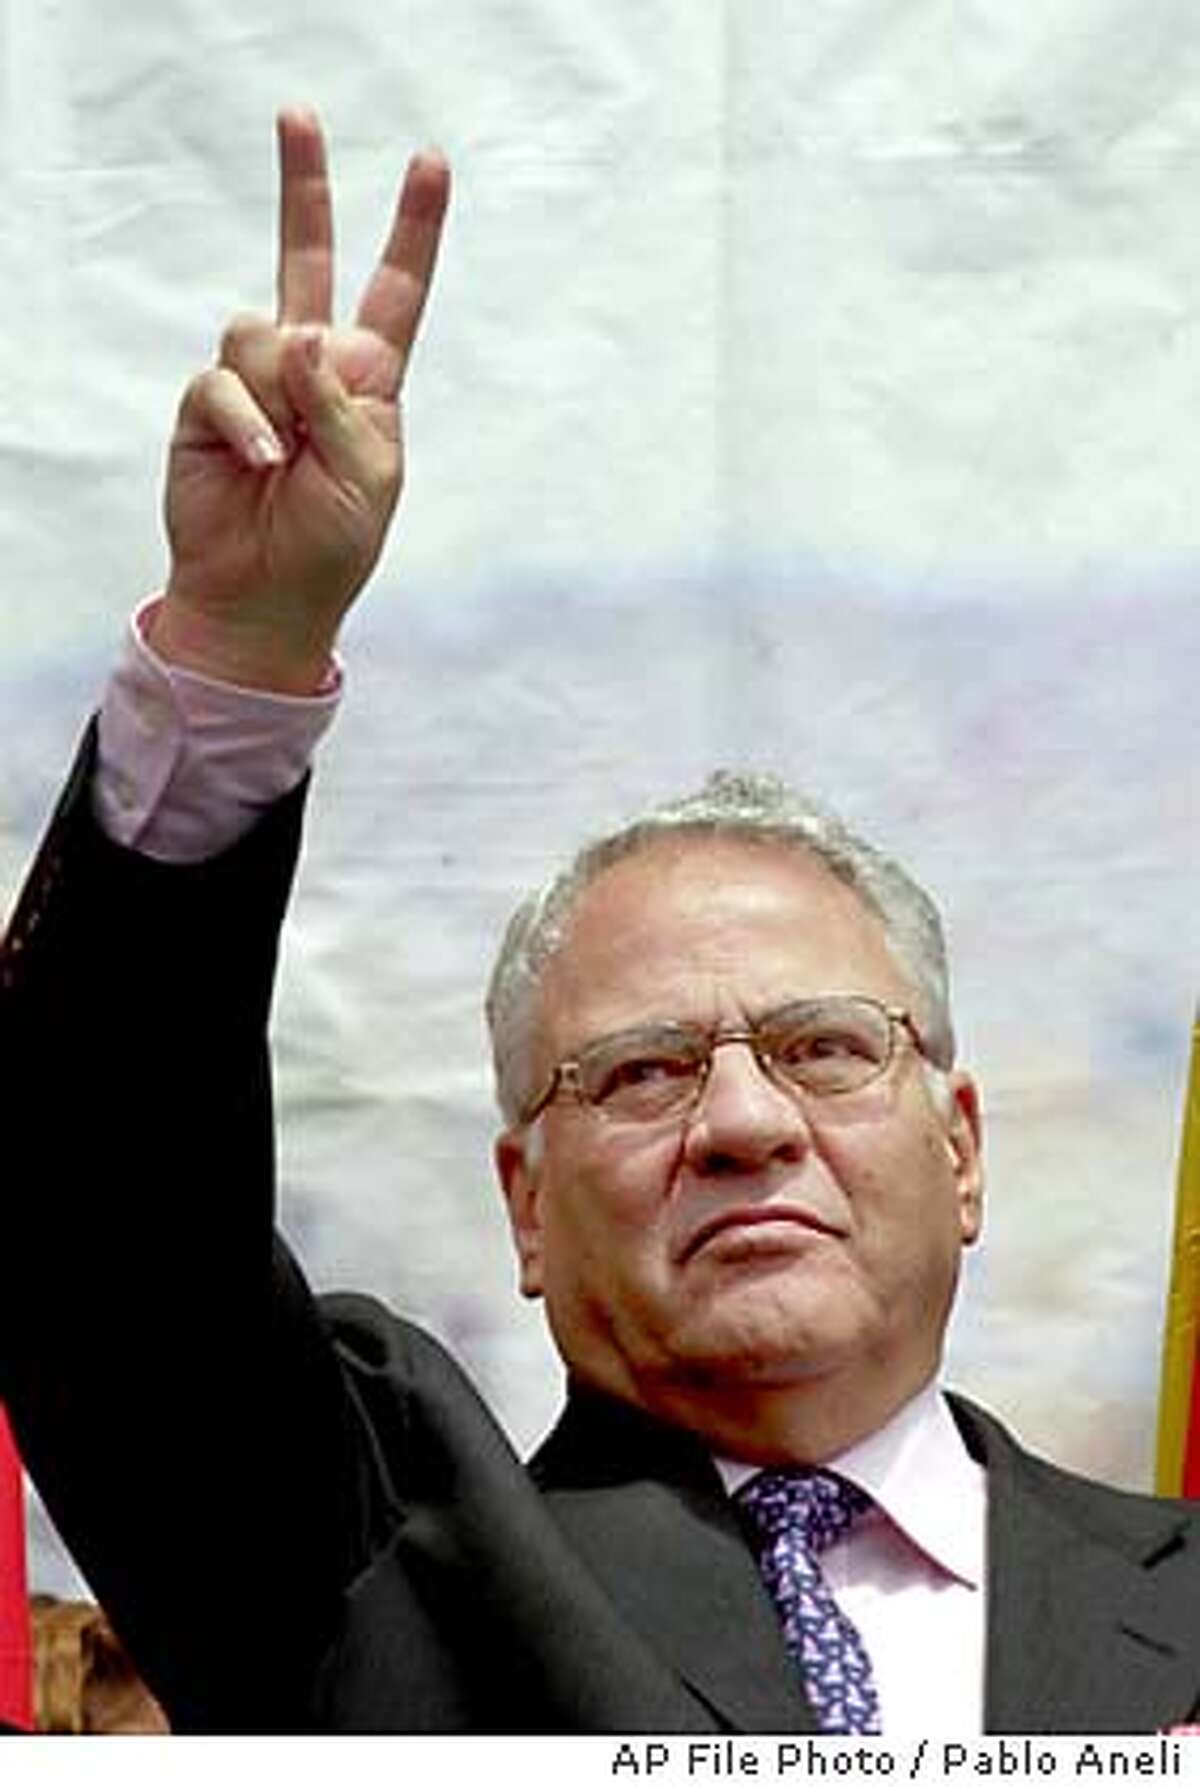 ** FILE ** Bolivian President Gonzalo Sanchez de Lozada, a businessman nicknamed ``Goni'', greets supporters in this April 9, 2002 file photo. The U.S.-educated millionaire who took office for a second term in August 2002 will resign Friday Oct. 17, 2003 after weeks of deadly street riots triggered by a goverment plan to export natural gas, a presidential aide said Friday. (AP Photo/Pablo Aneli, File)